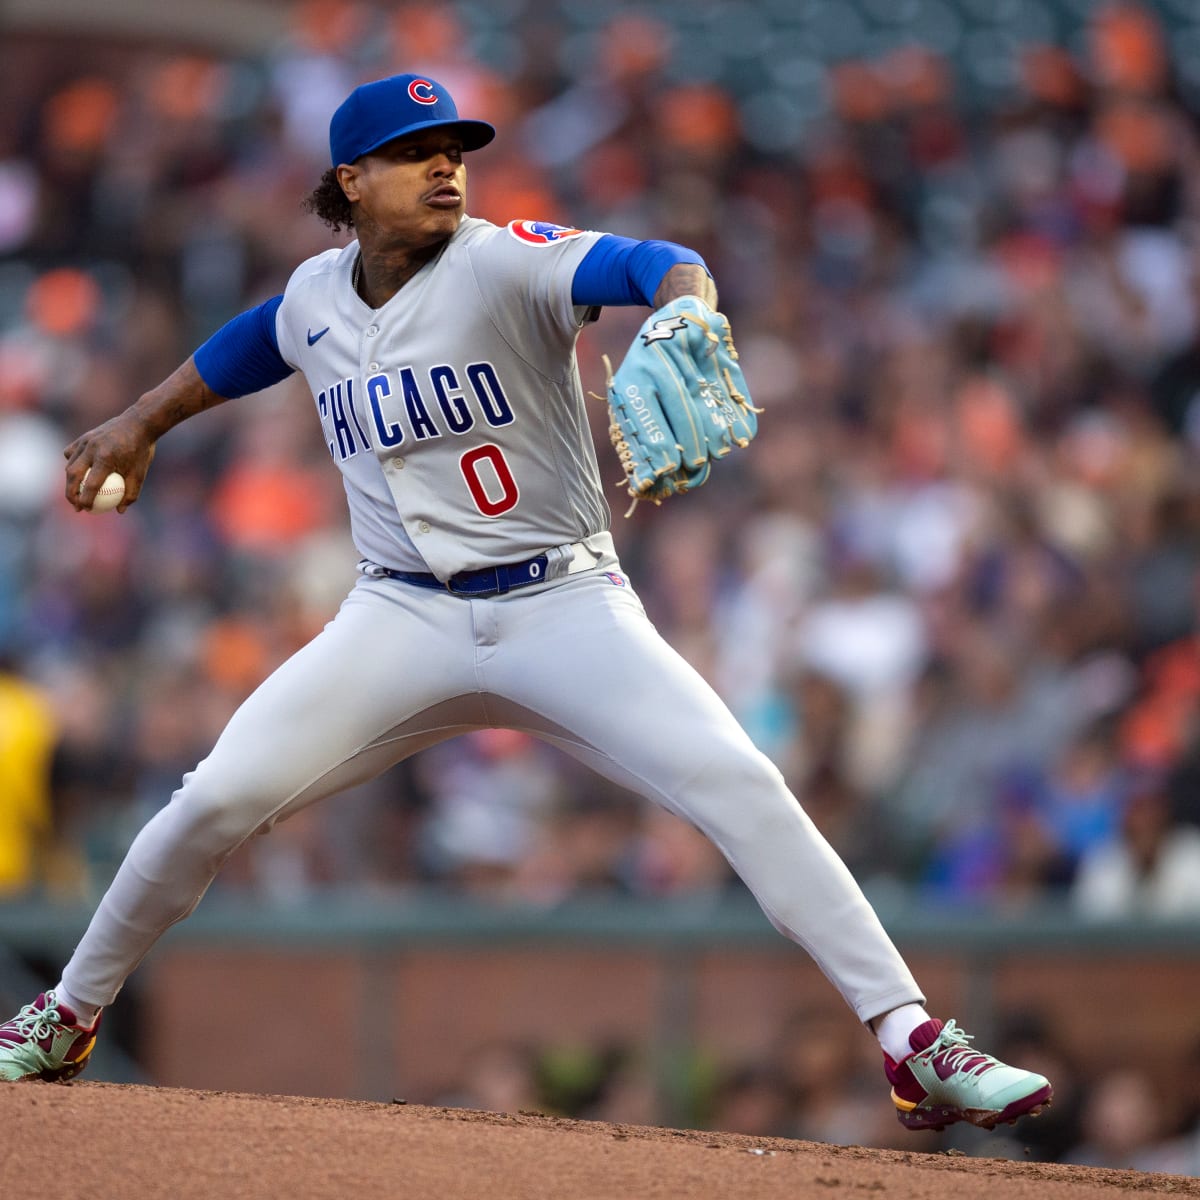 Love being a Cub': Marcus Stroman discusses his long-term future with Cubs  ahead of trade deadline - Marquee Sports Network